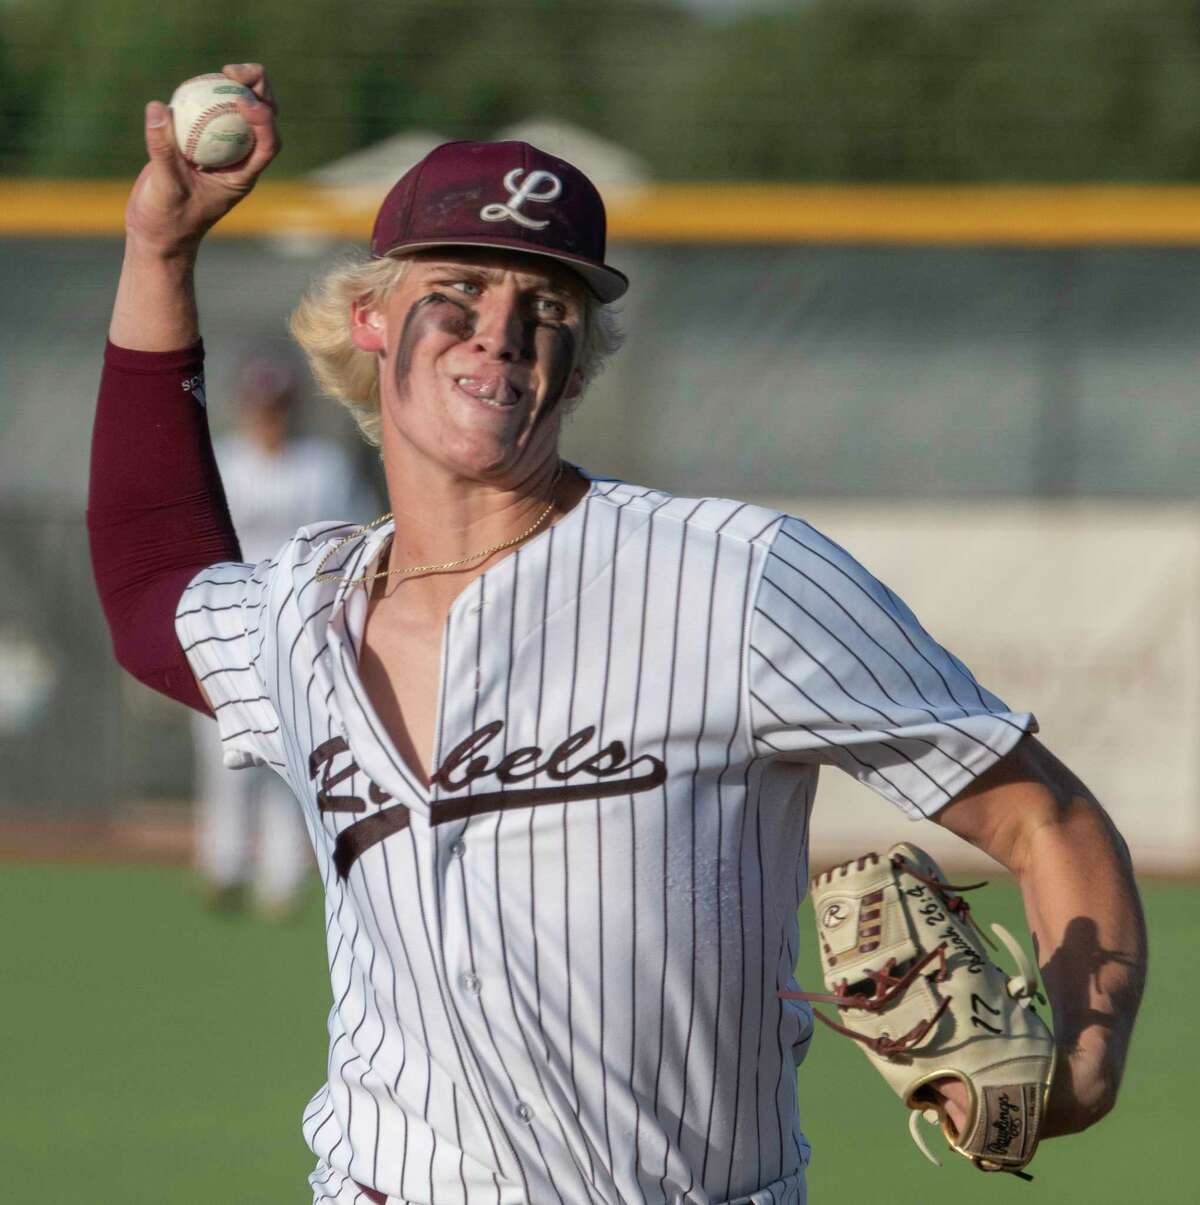 Legacy High's Chase Shores pitches against Keller High during game 1 of the Class 6A regional quarterfinal series 05/19/2022 at Ernie Johnson Field. Tim Fischer/Reporter-Telegram